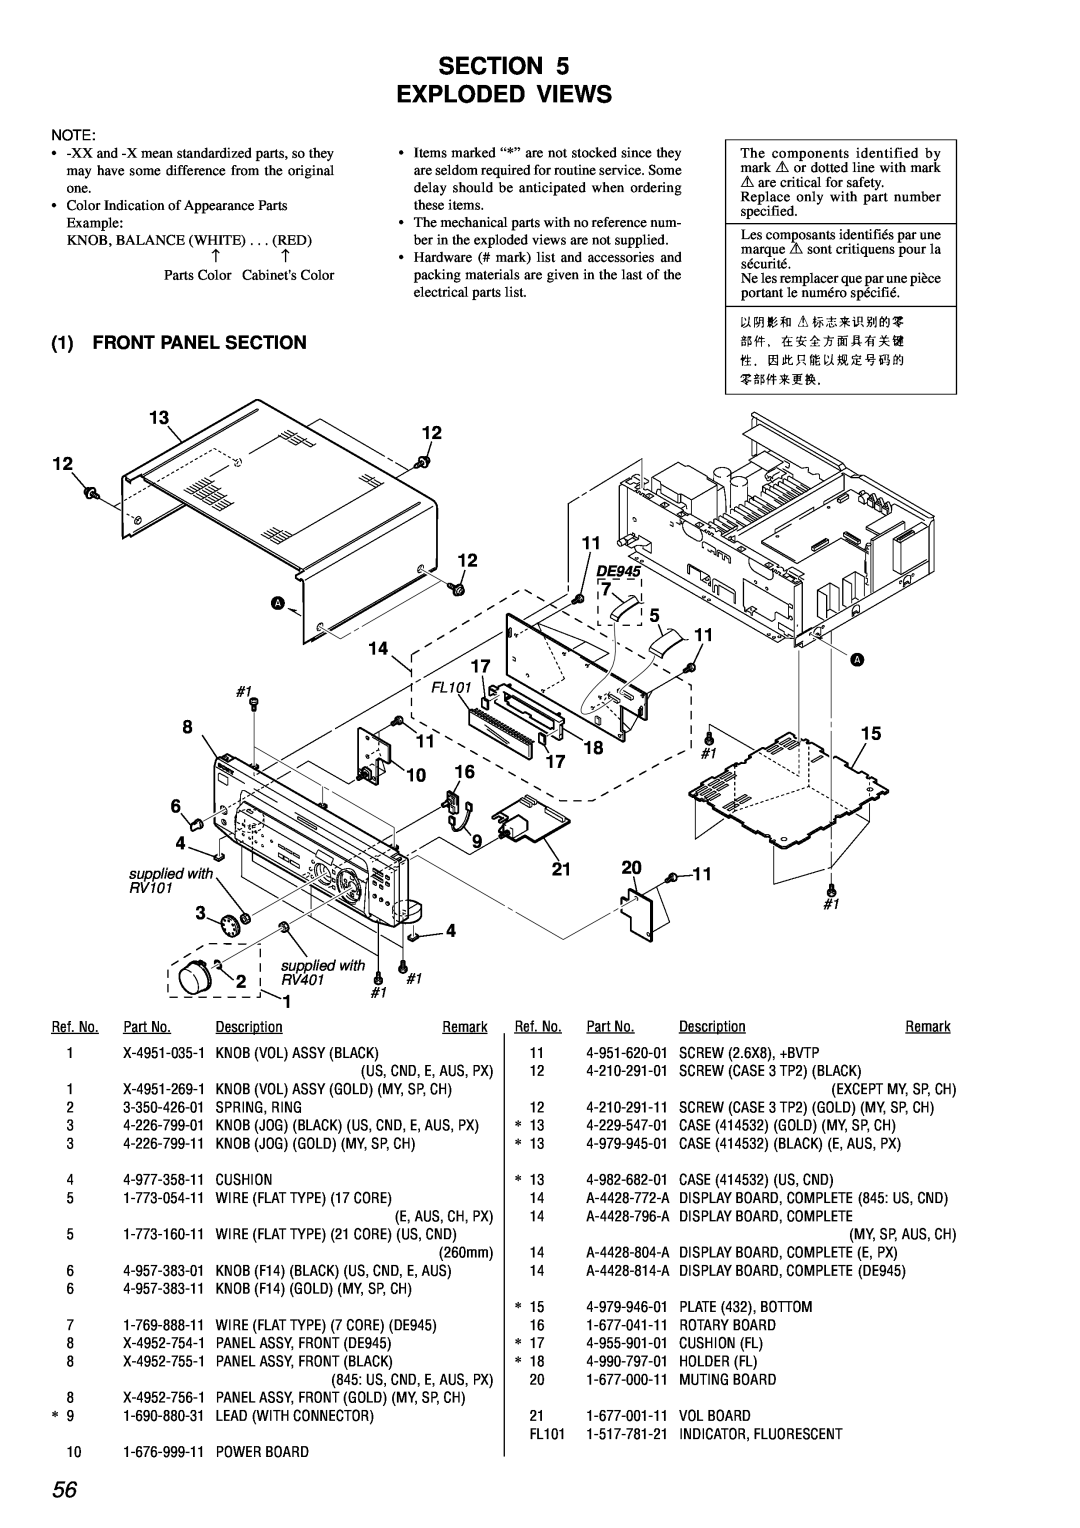 Sony STR-DE845 service manual Section Exploded Views, 1FRONT PANEL 12 12 